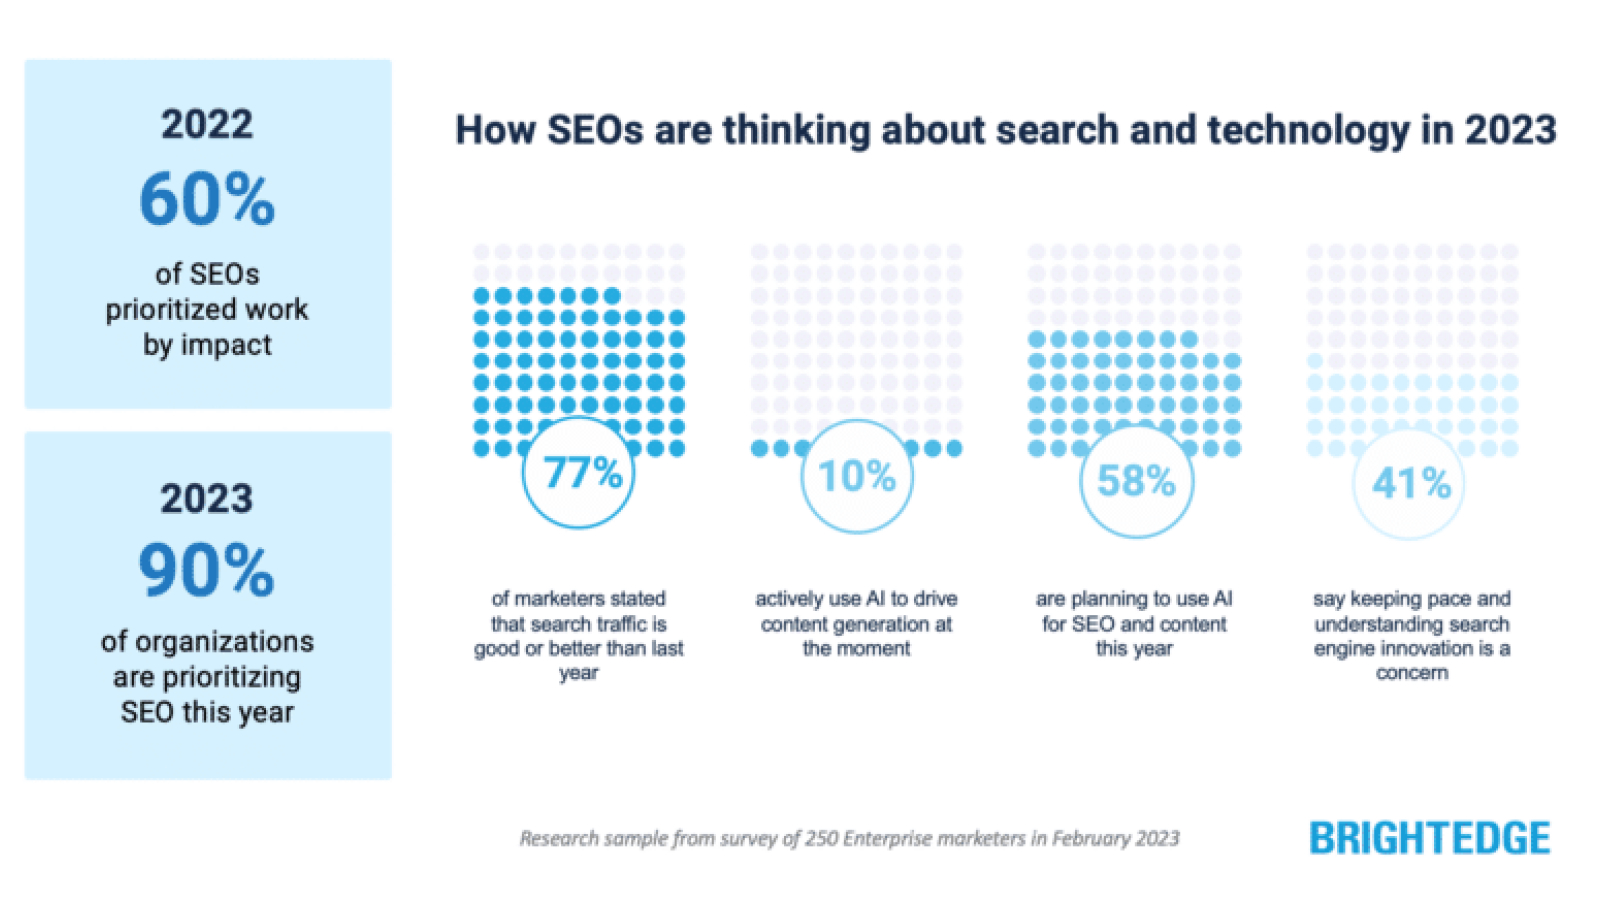 Use of AI for SEO and content to grow 5x this year